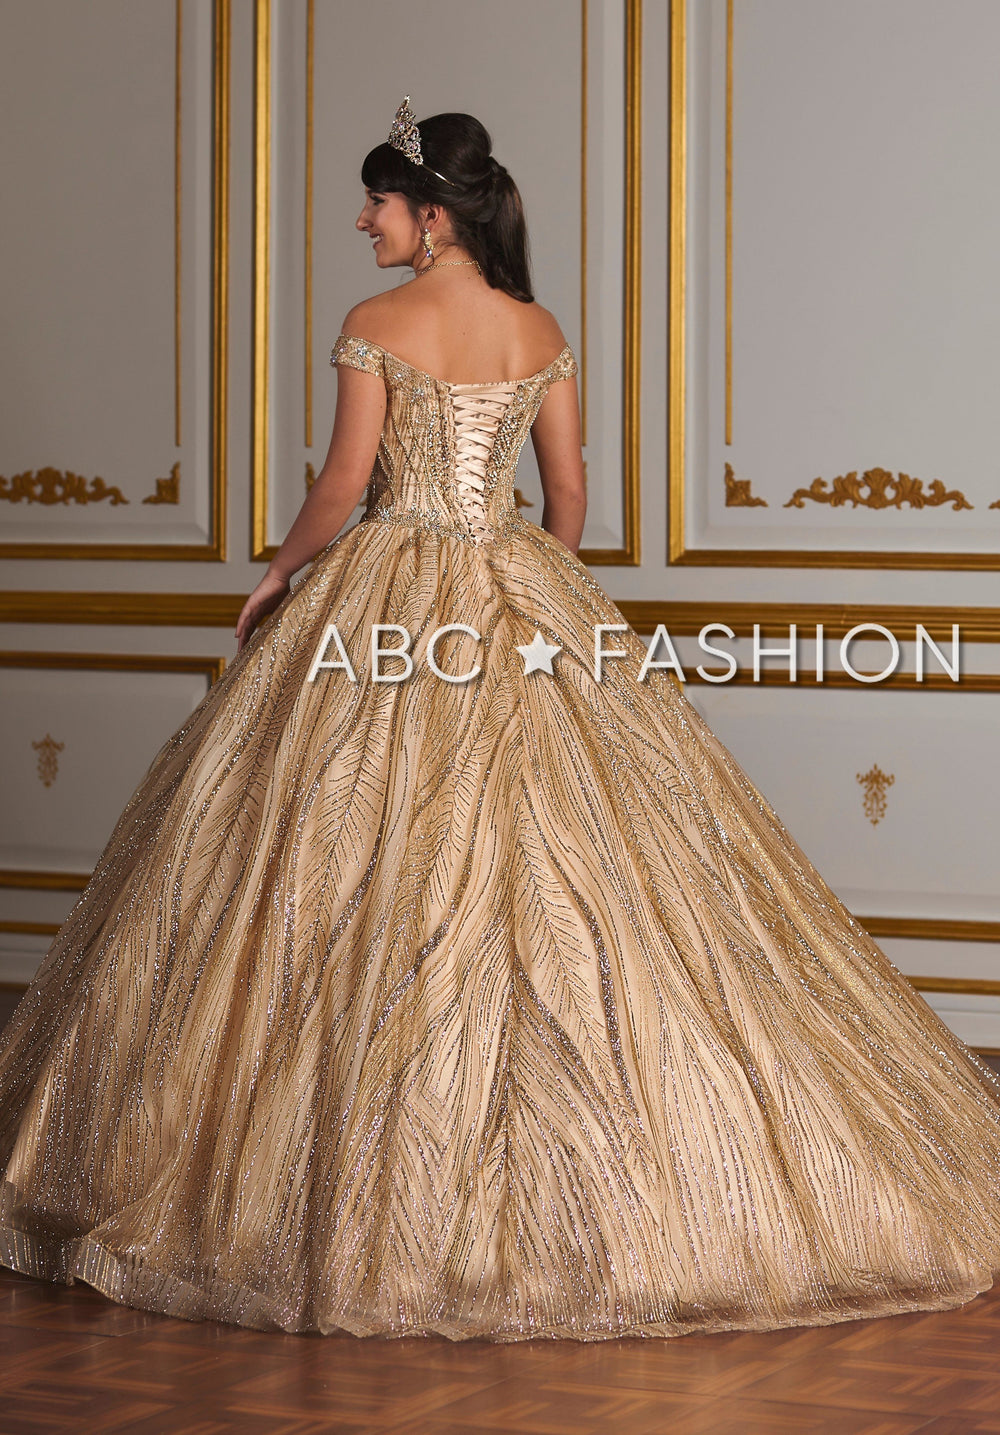 Off Shoulder Glitter Quinceanera Dress by House of Wu 26937-Quinceanera Dresses-ABC Fashion